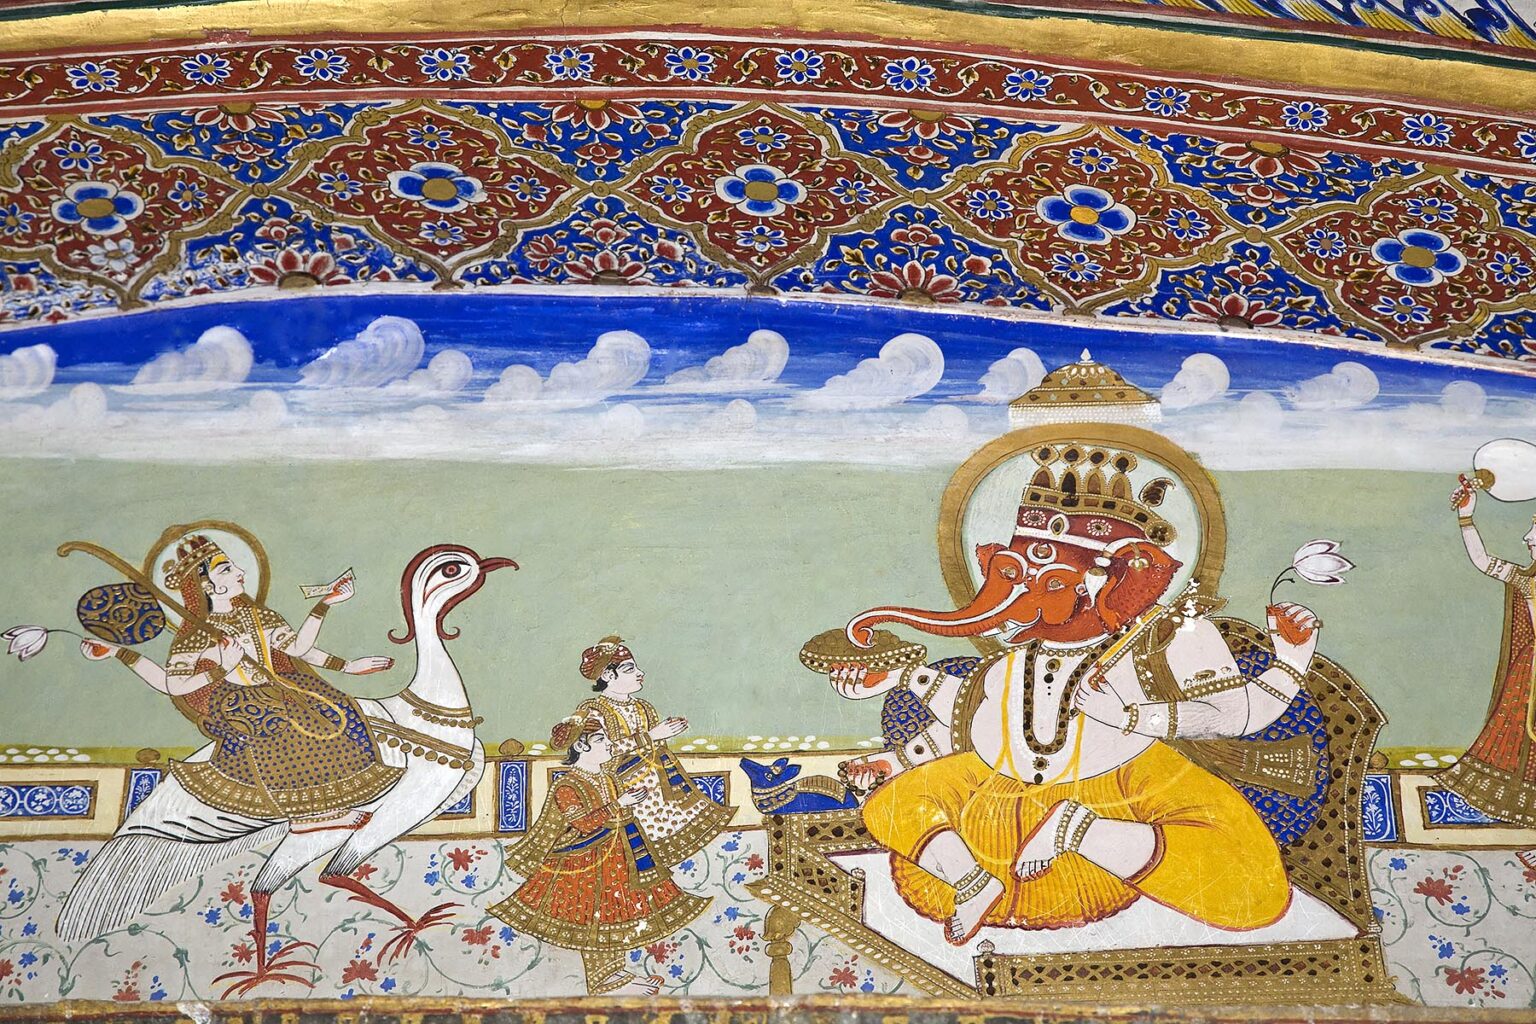 Hand Painted mural of GANESH in the AKHEY VILLA inside the MAHARAJA'S PALACE located in JAISALMER FORT - RAJASTHAN, INDIA